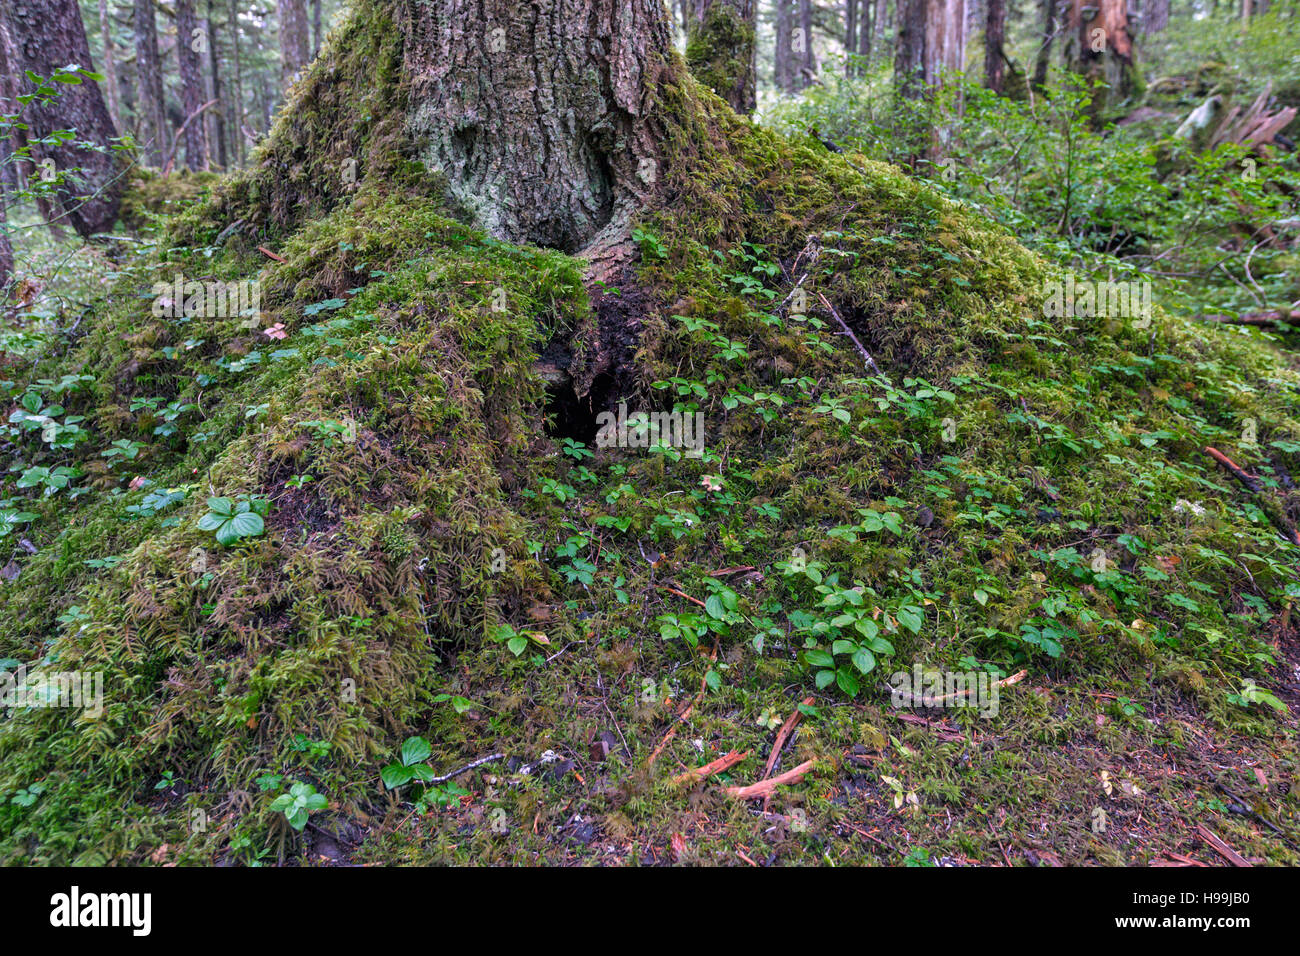 Interior of the temperate coastal rain forest, Tongass National Forest, Alaska, USA Stock Photo